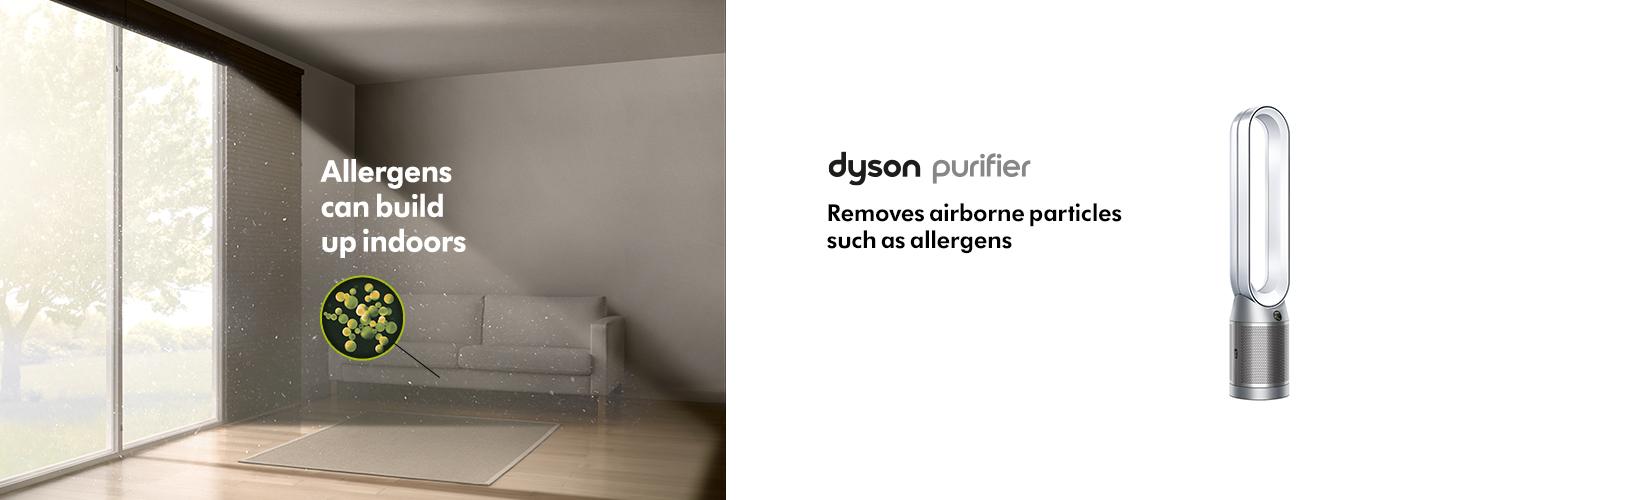 Dyson purifier cool. Night mode for lighter sleepers. Monitors and purifies.